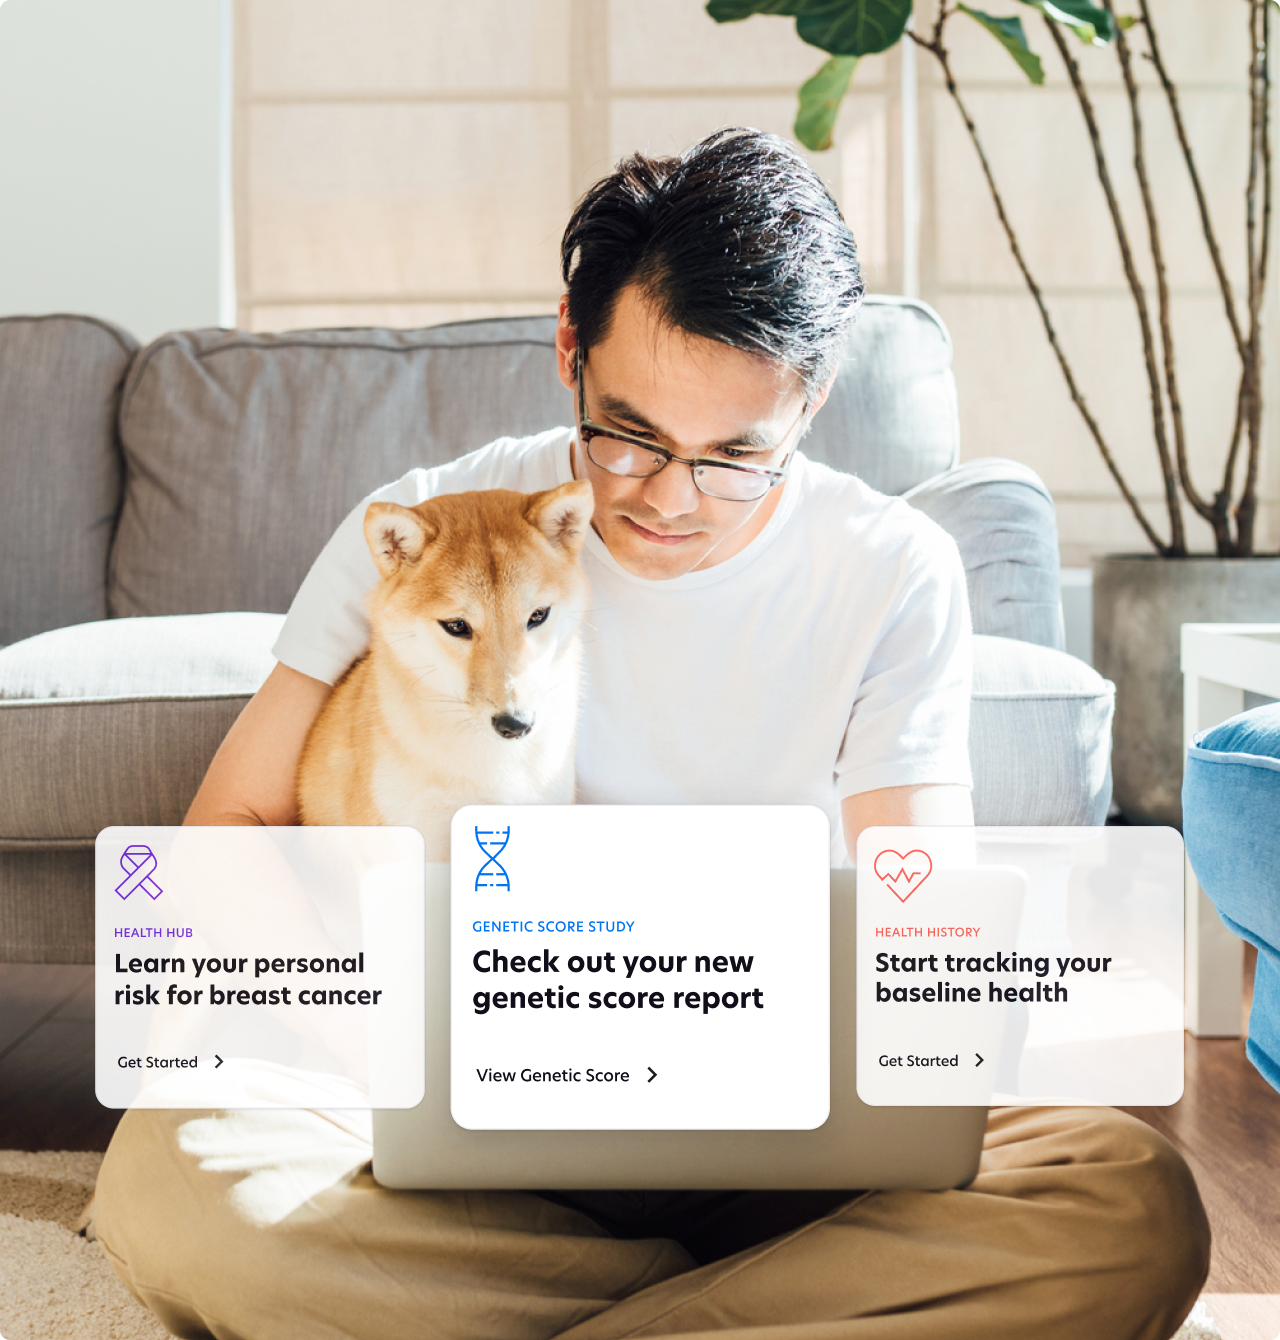 Man sitting on the ground with a dog and laptop, and three Color health option screens overlayed